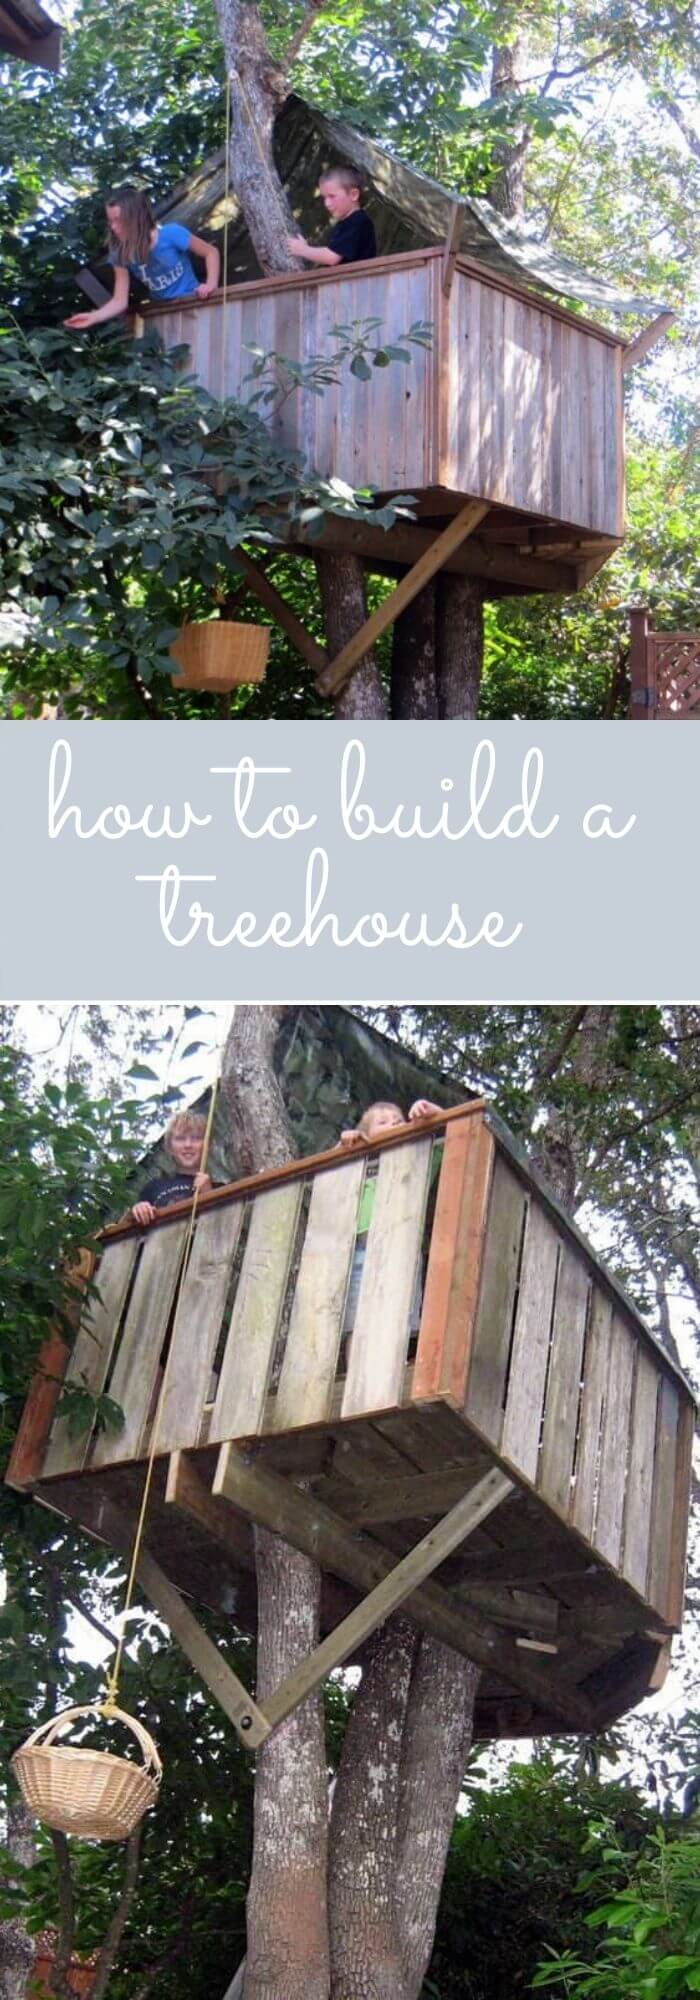 Build a treehouse for your kids